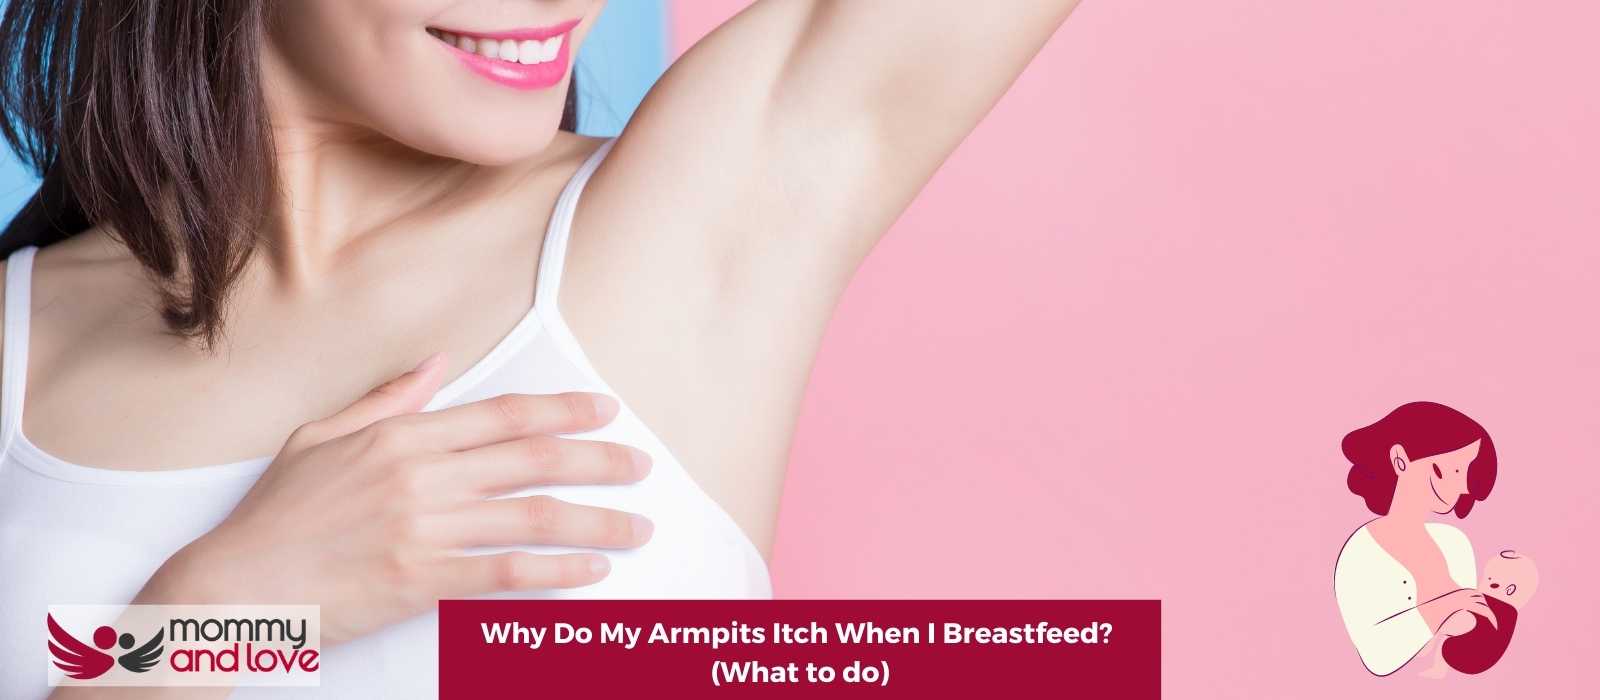 Why Do My Armpits Itch When I Breastfeed? (What to do)